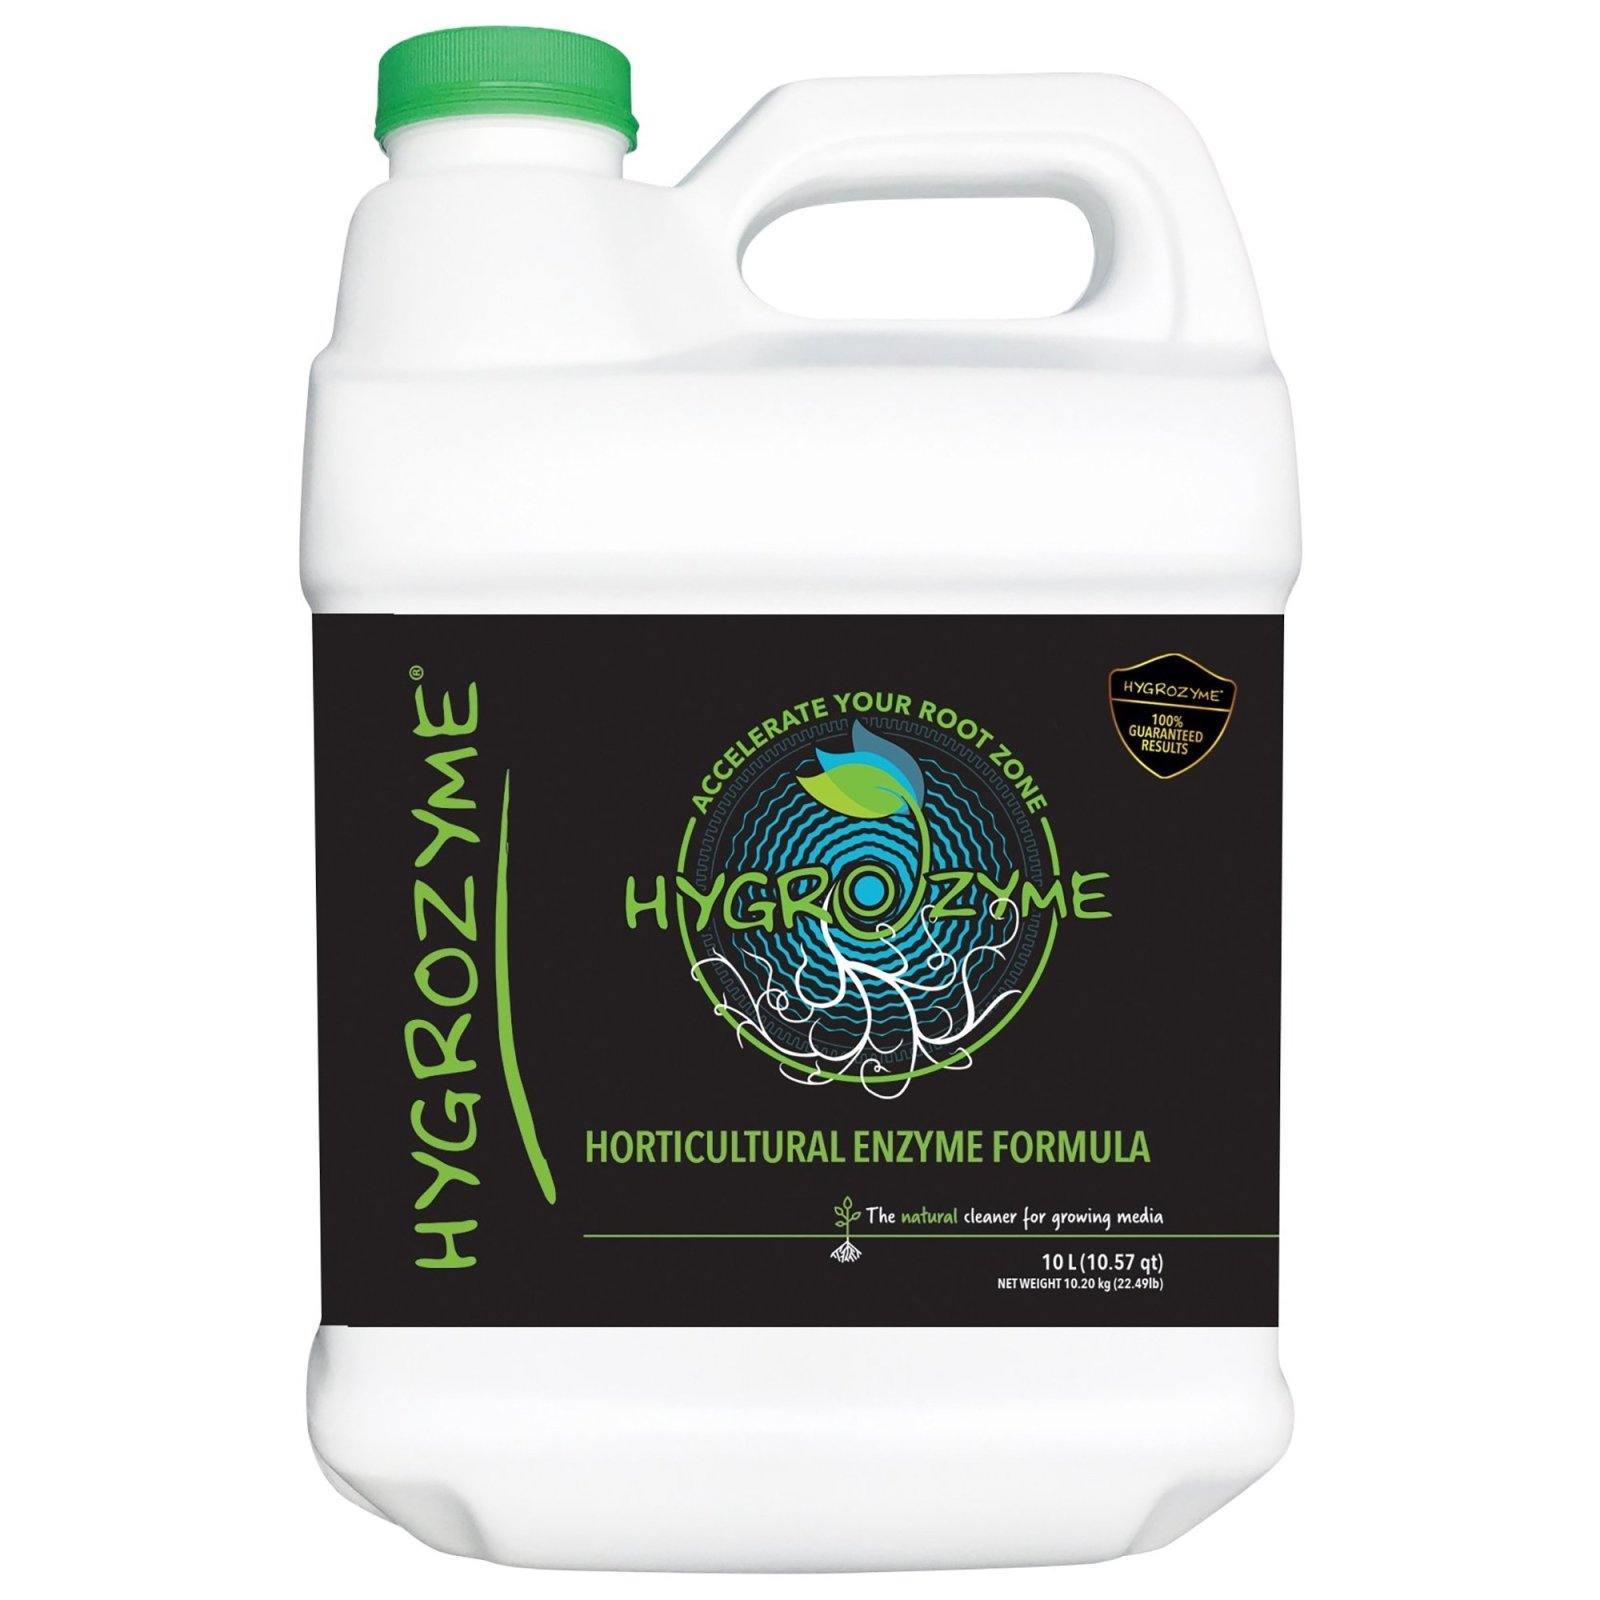 Nutrients, Additives & Solutions - Hygrozyme Horticultural Enzyme Formula - 776190101031- Gardin Warehouse